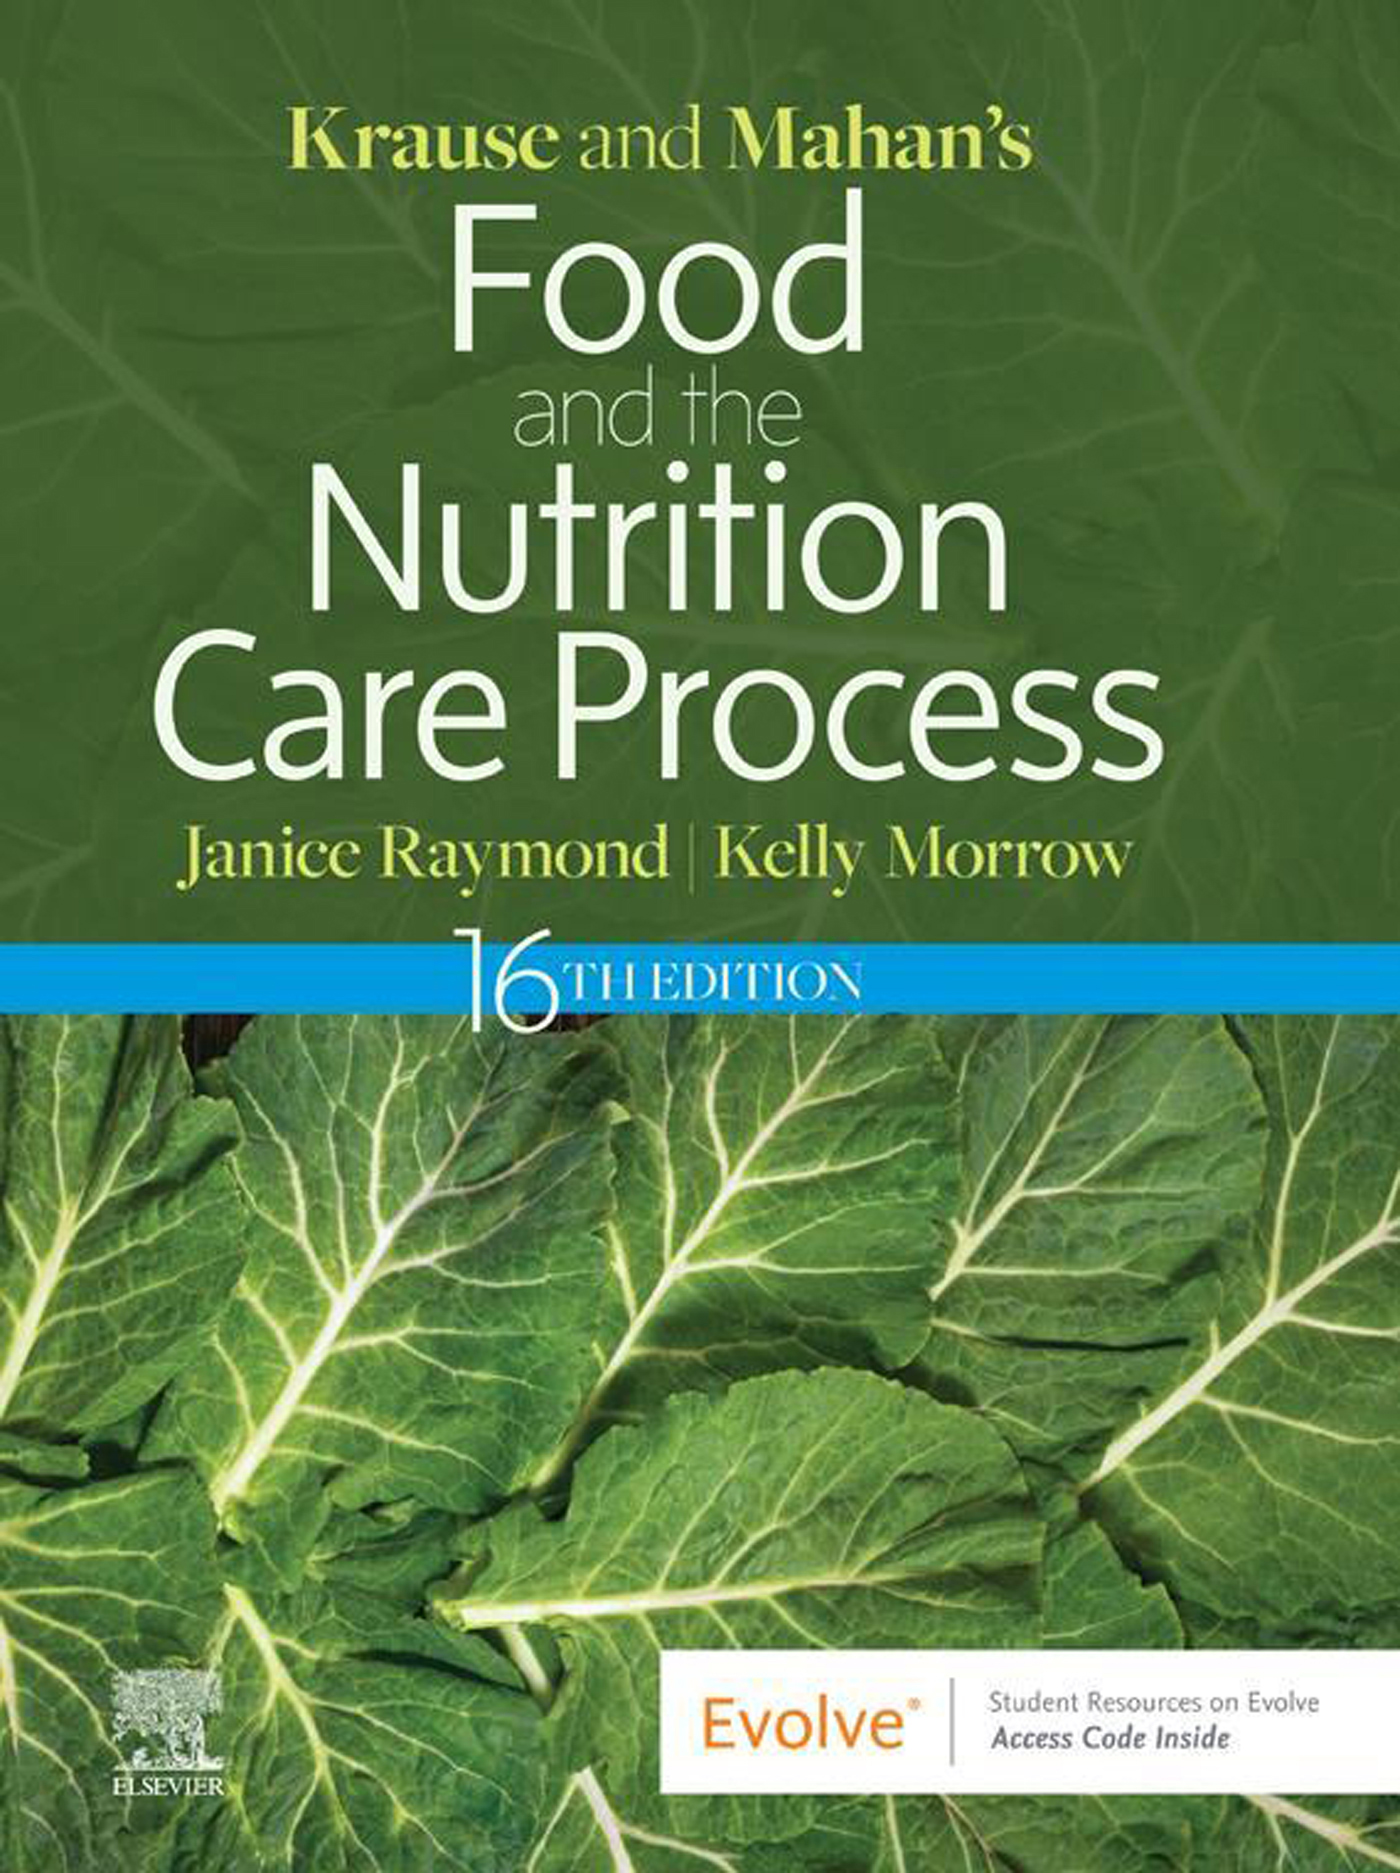 Krause and Mahan’s Food and the Nutrition Care Process, 16e, E-Book